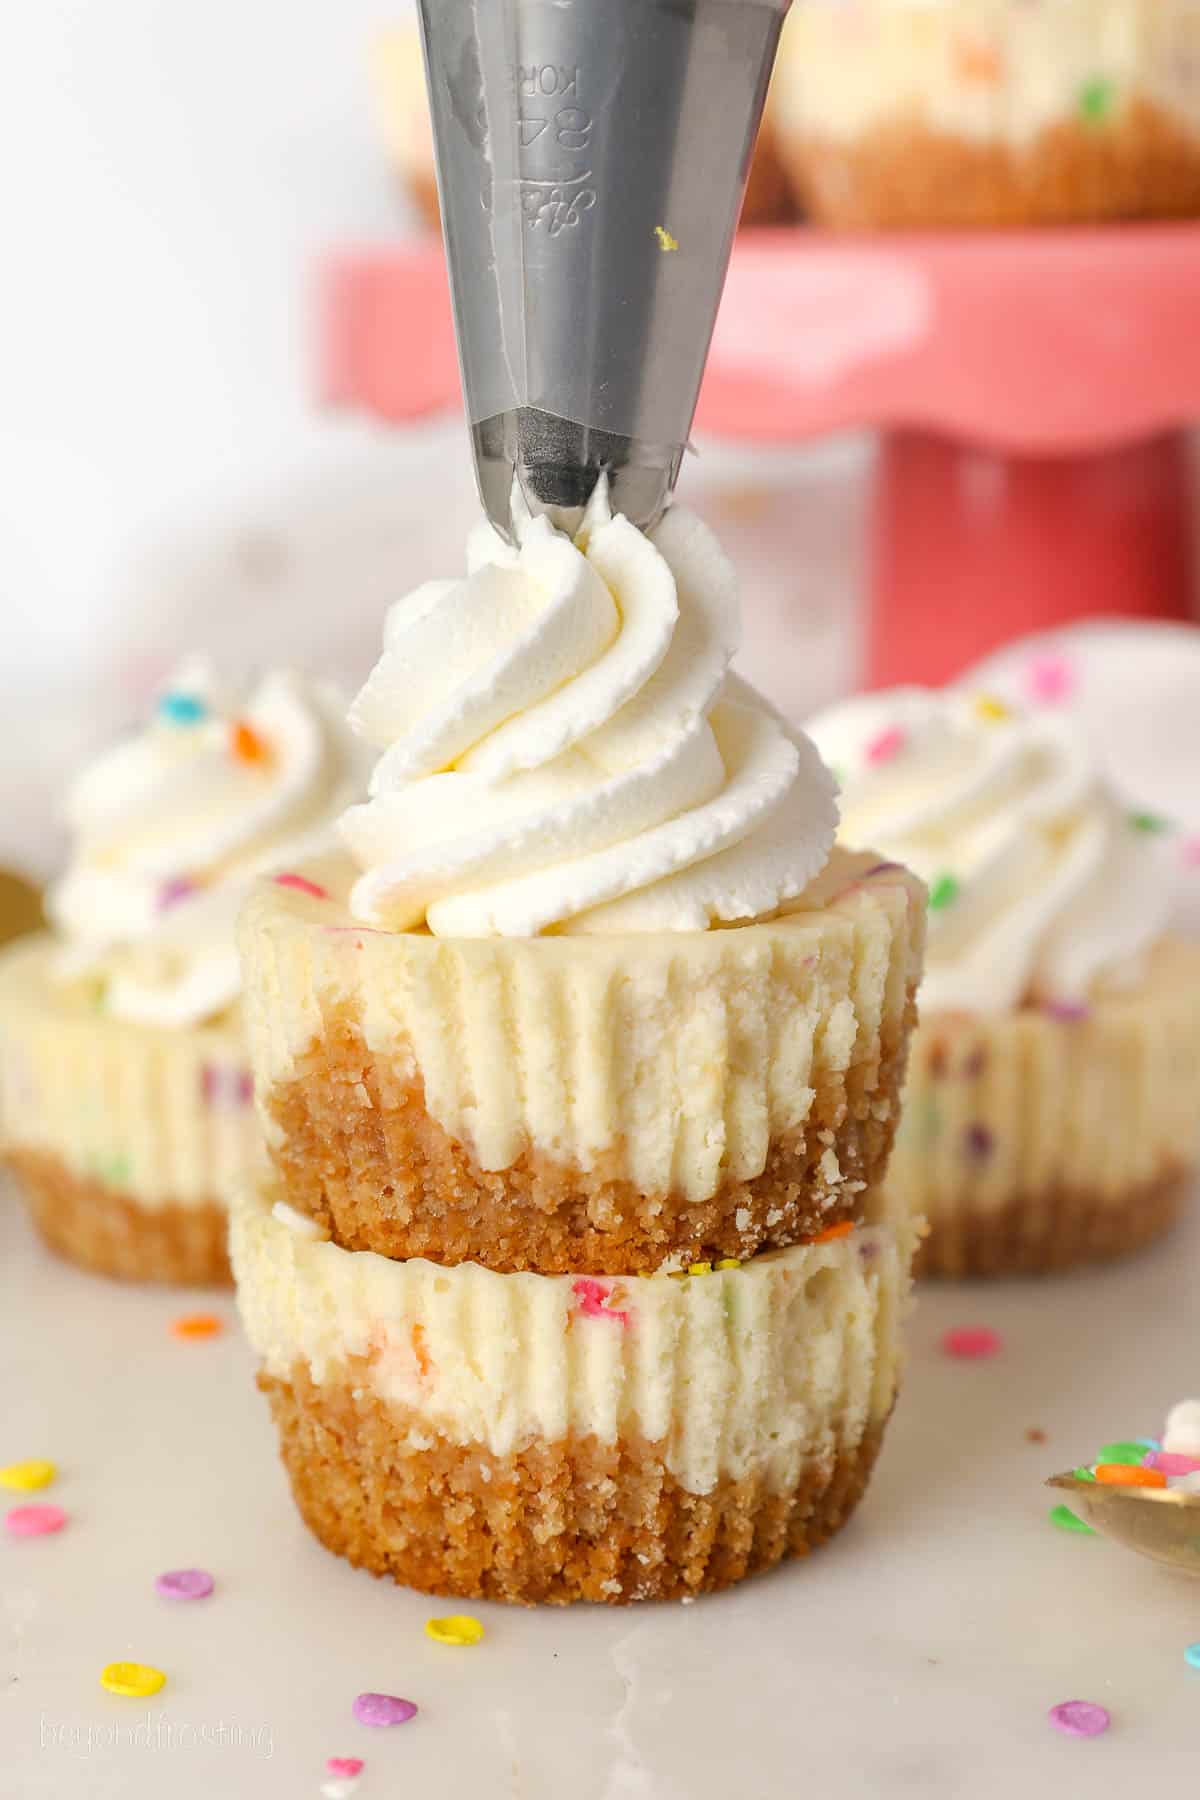 A piping tip pipes a swirl of whipped cream on top of two stacked mini funfetti cheesecakes.